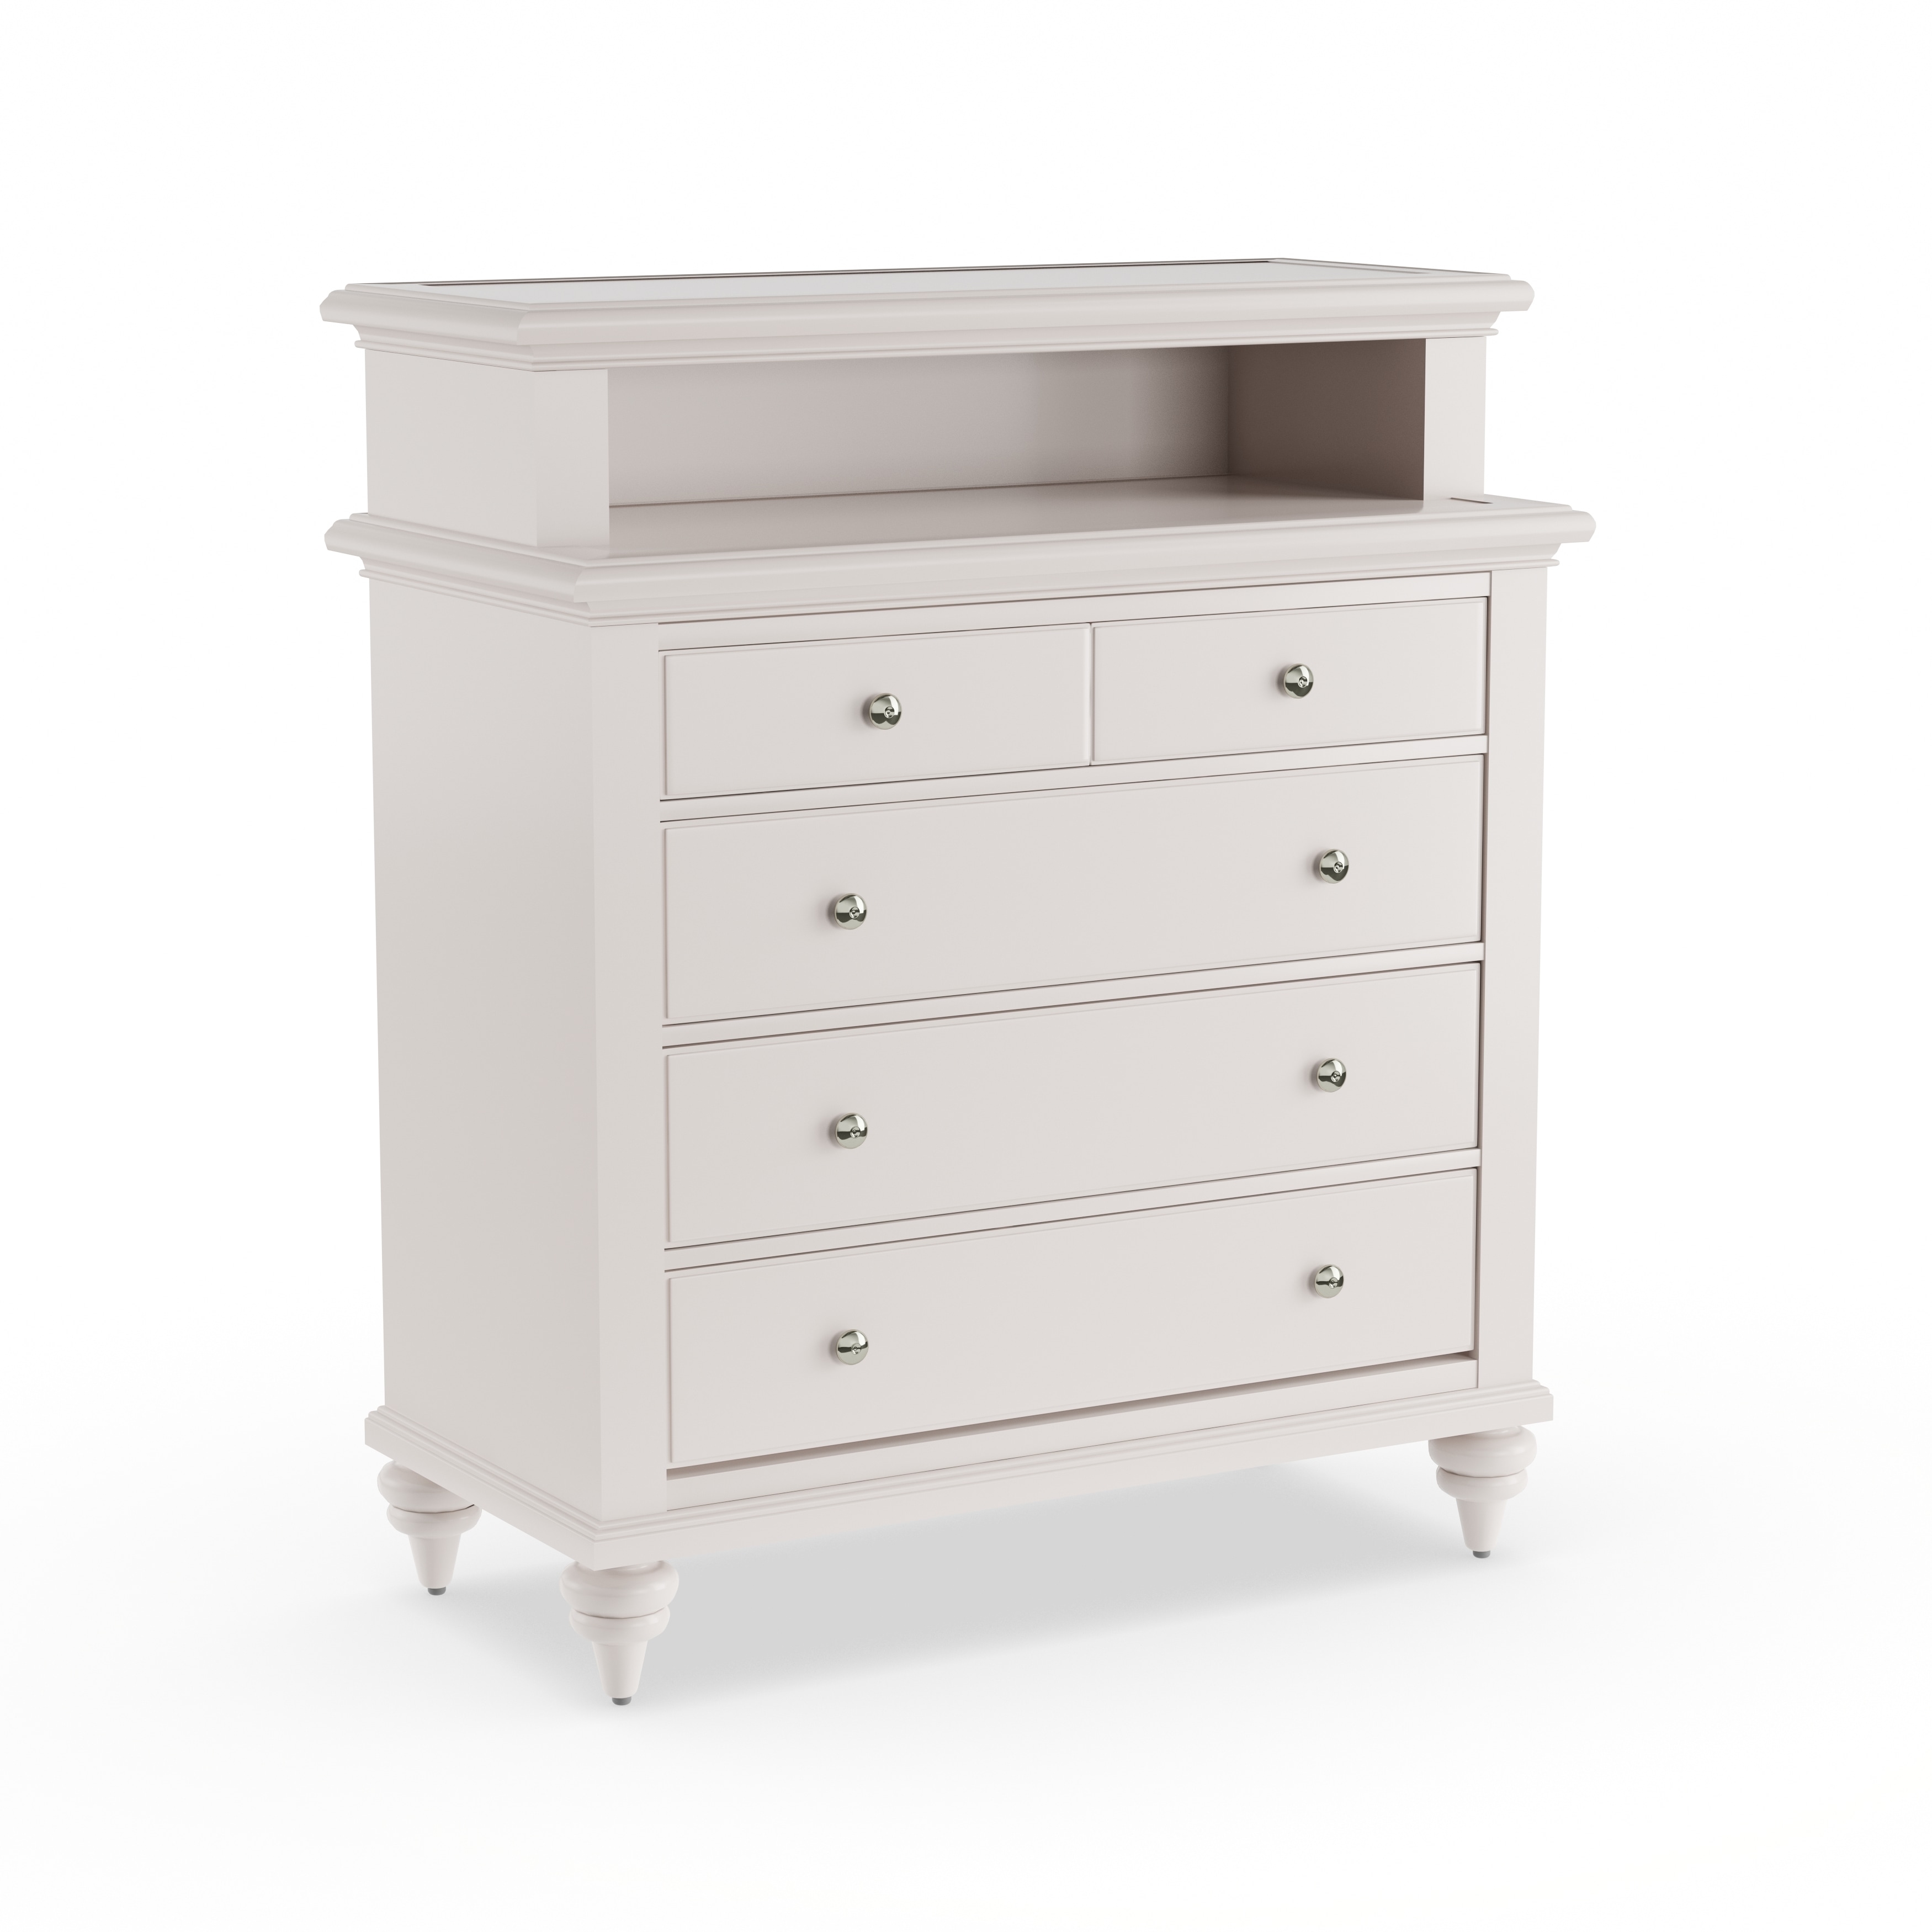 Shop Bermuda Tv Media Chest Brushed White Finish By Home Styles